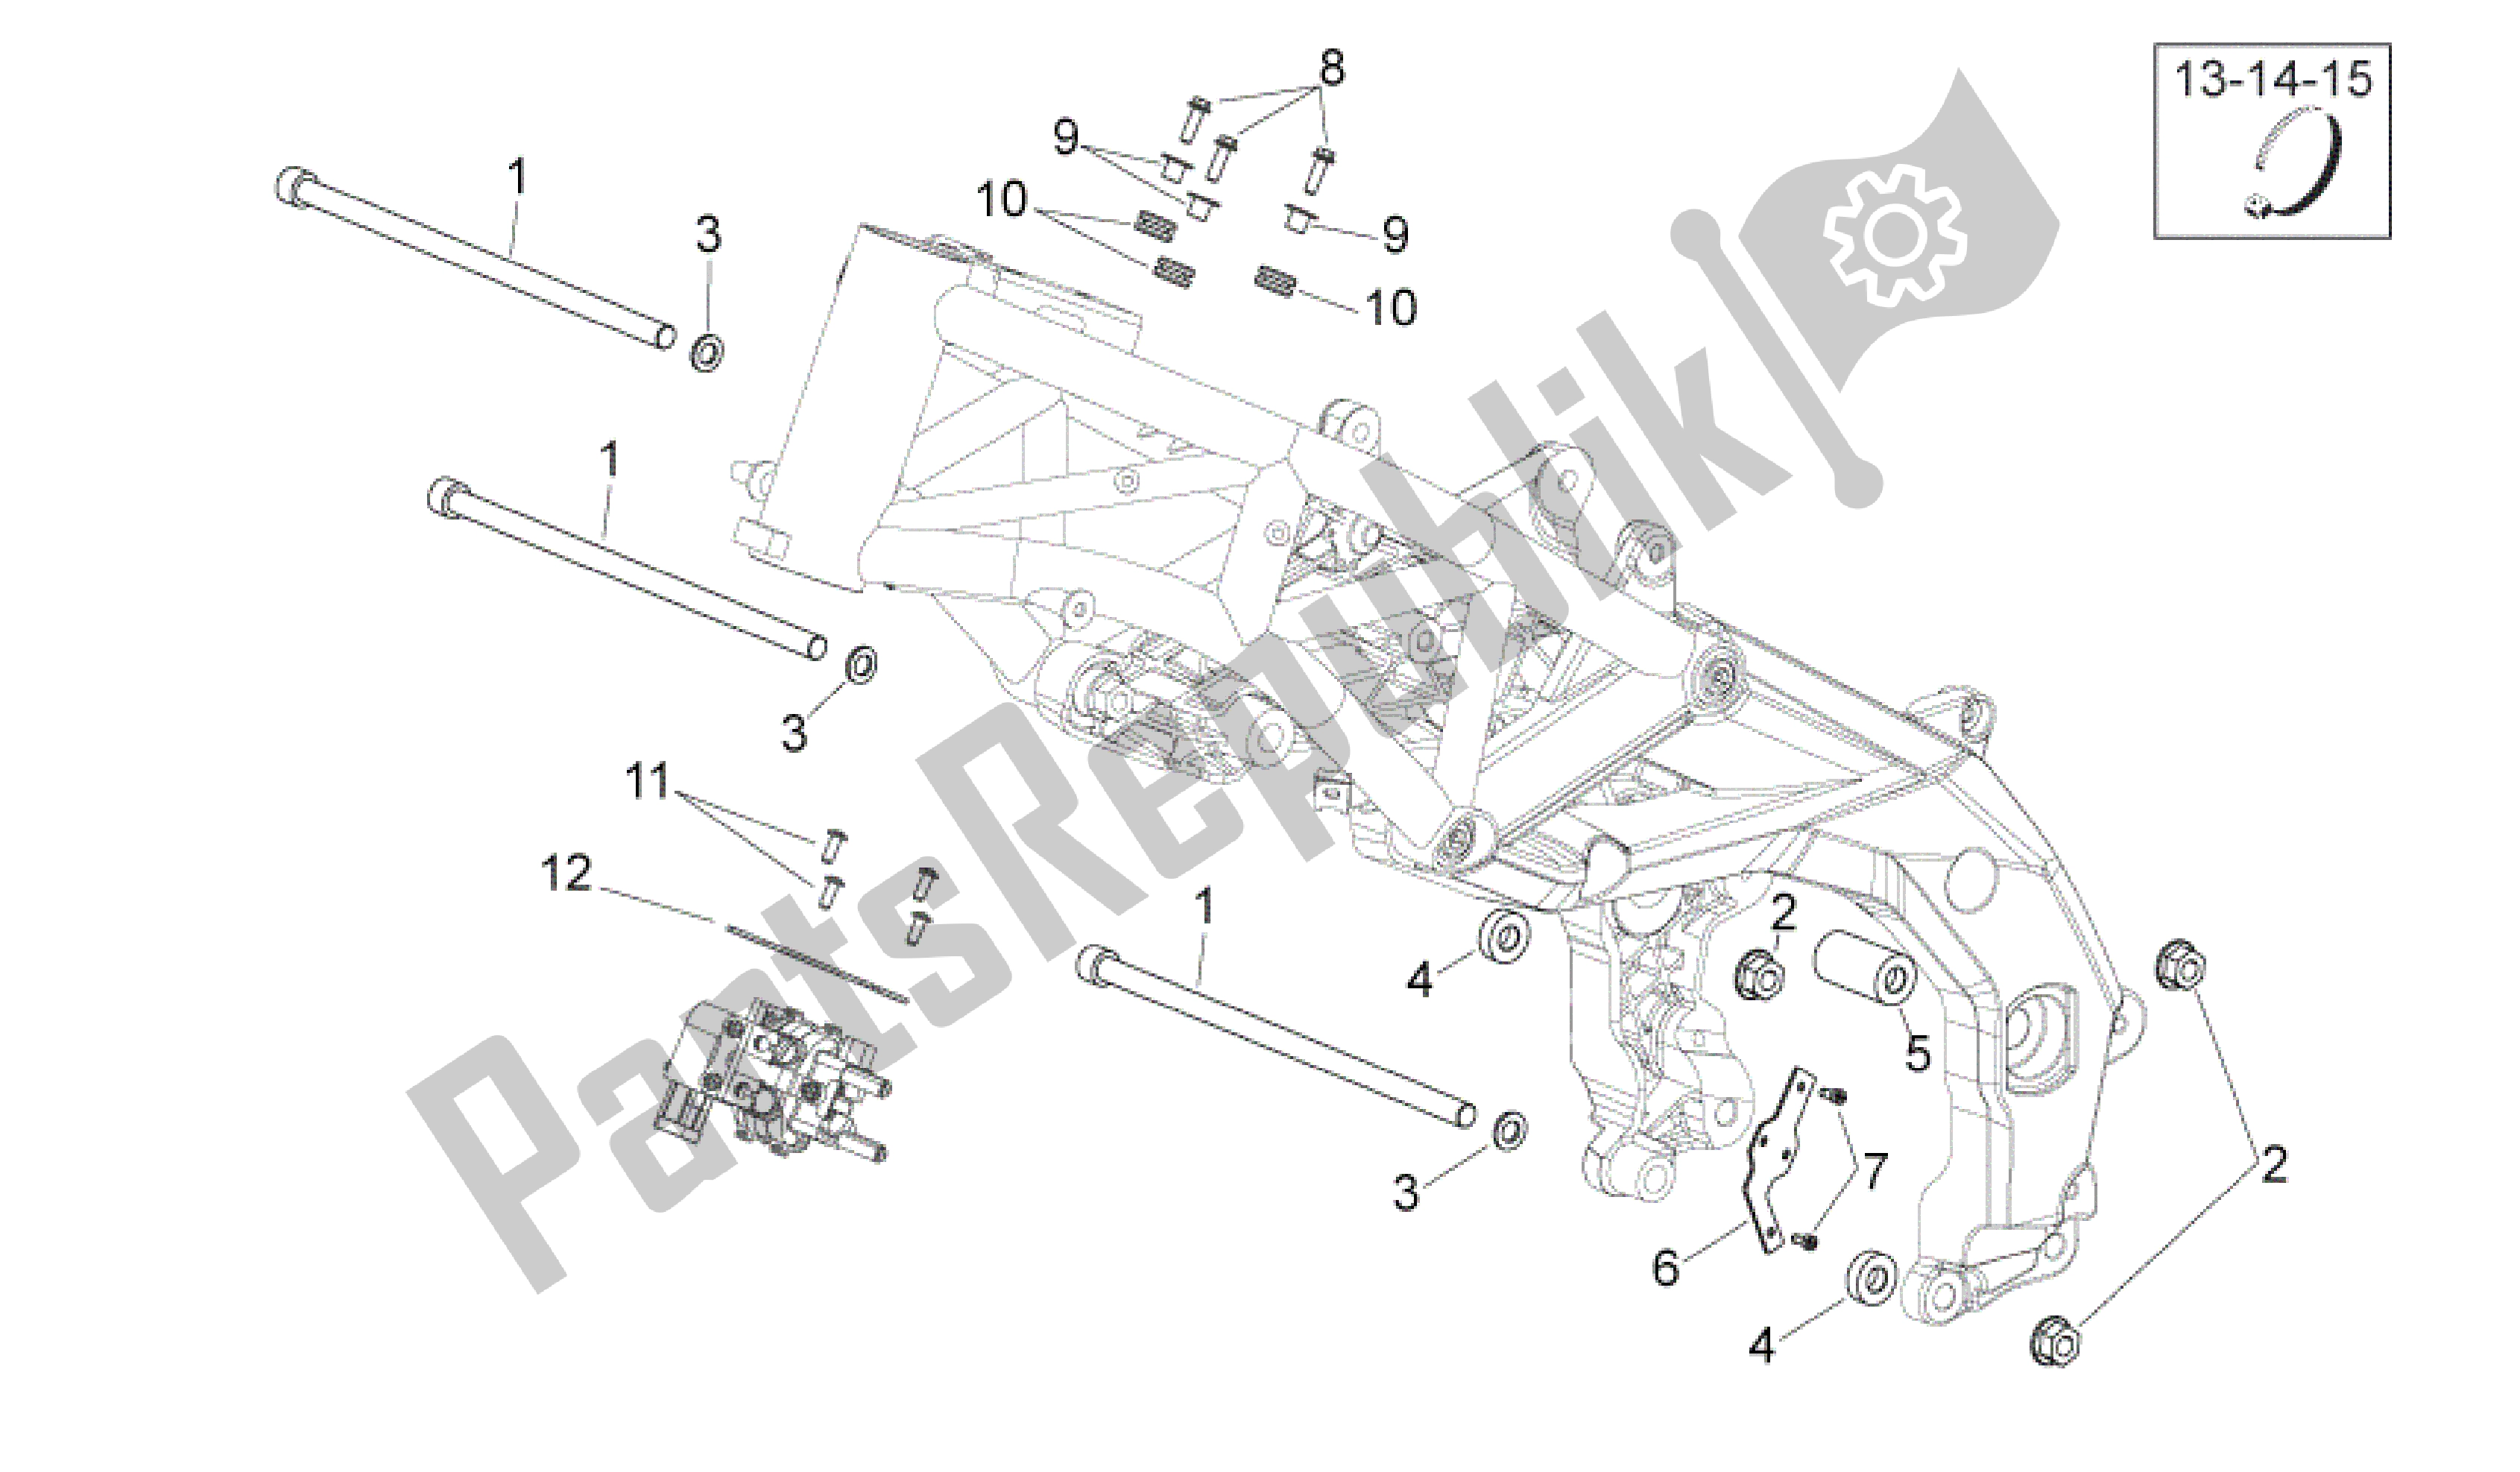 All parts for the Frame Ii of the Aprilia Shiver 750 2009